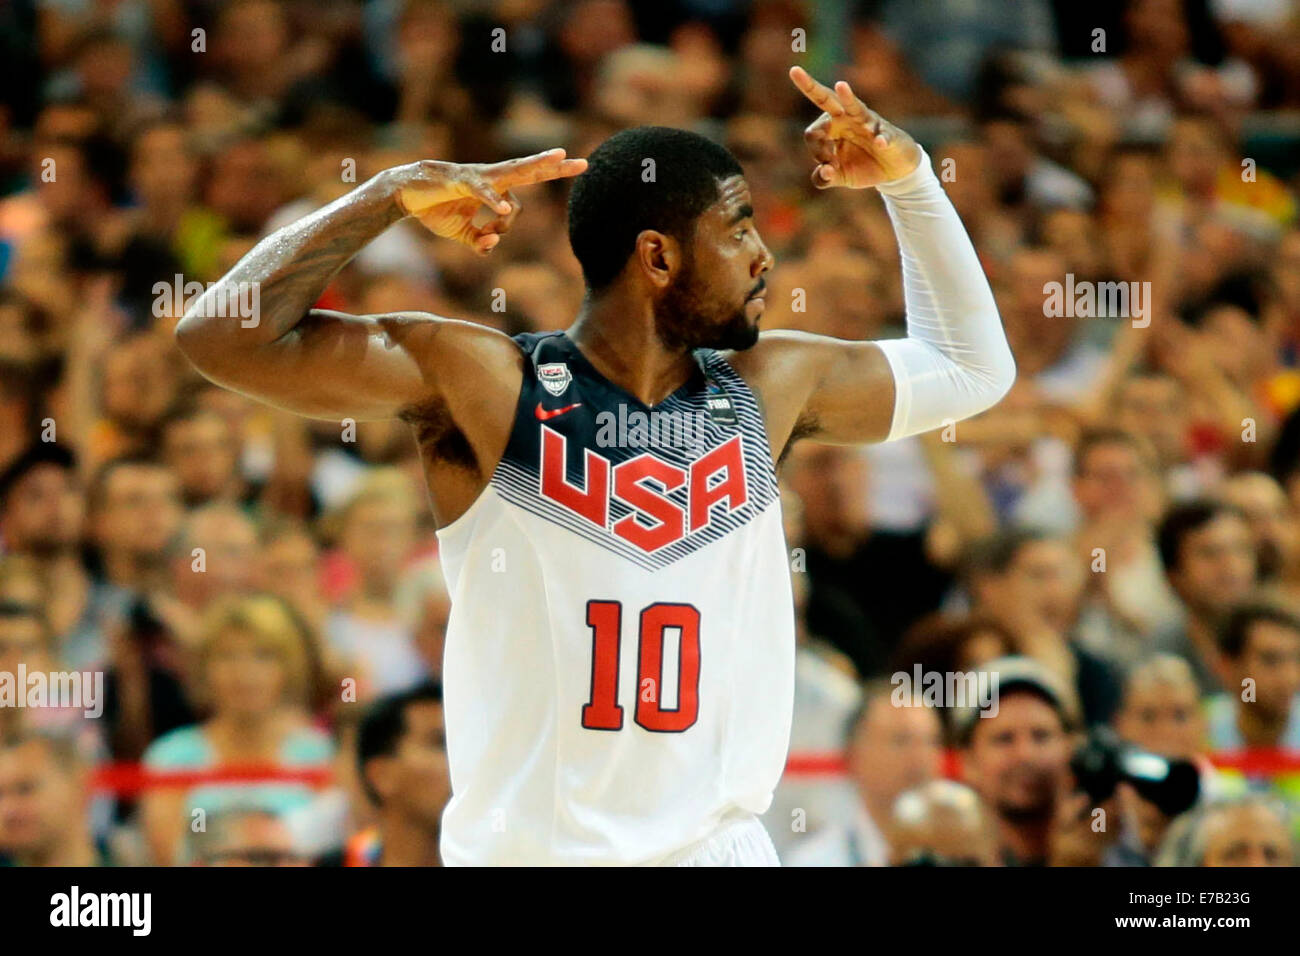 Barcelona, Spain. 11th September, 2014. Kyrie Irving of the United States  celebrates during the semifinal match with Lithuania at the 2014 FIBA  Basketball World Cup Spain in Barcelona Sept. 11, 2014. The